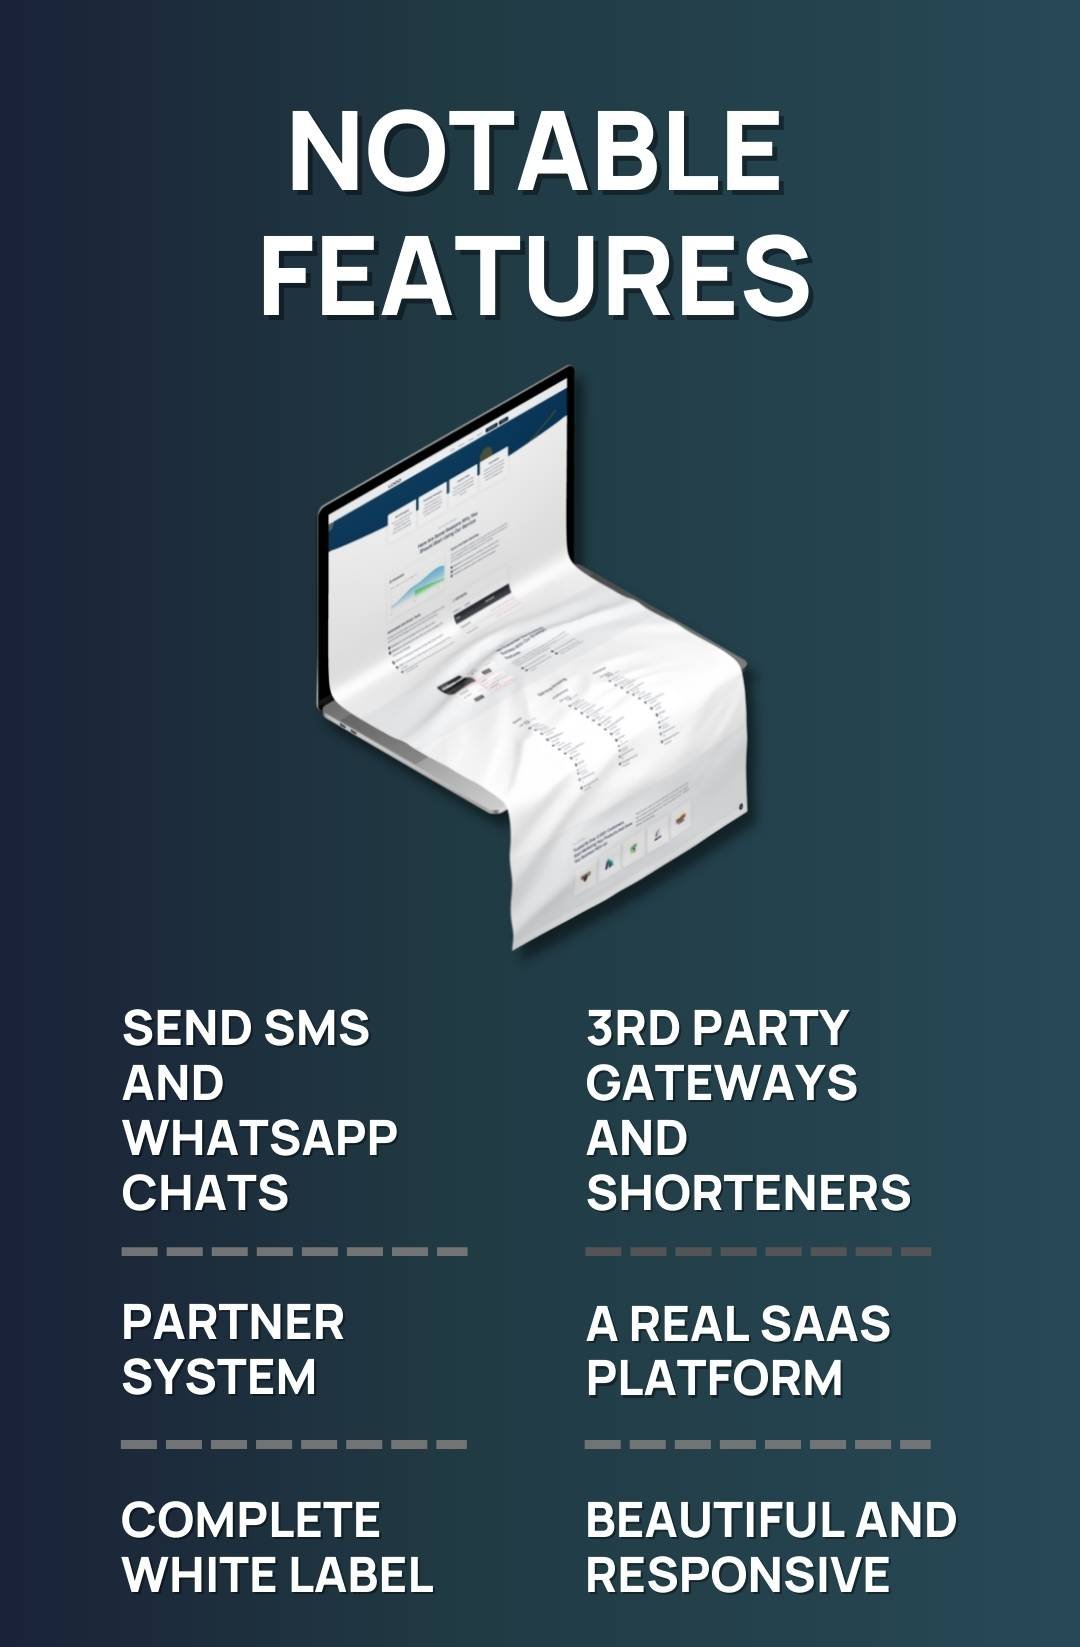 Zender - Ultimate Messaging Platform for SMS, WhatsApp & use Android Devices as SMS Gateways (SaaS) - 6